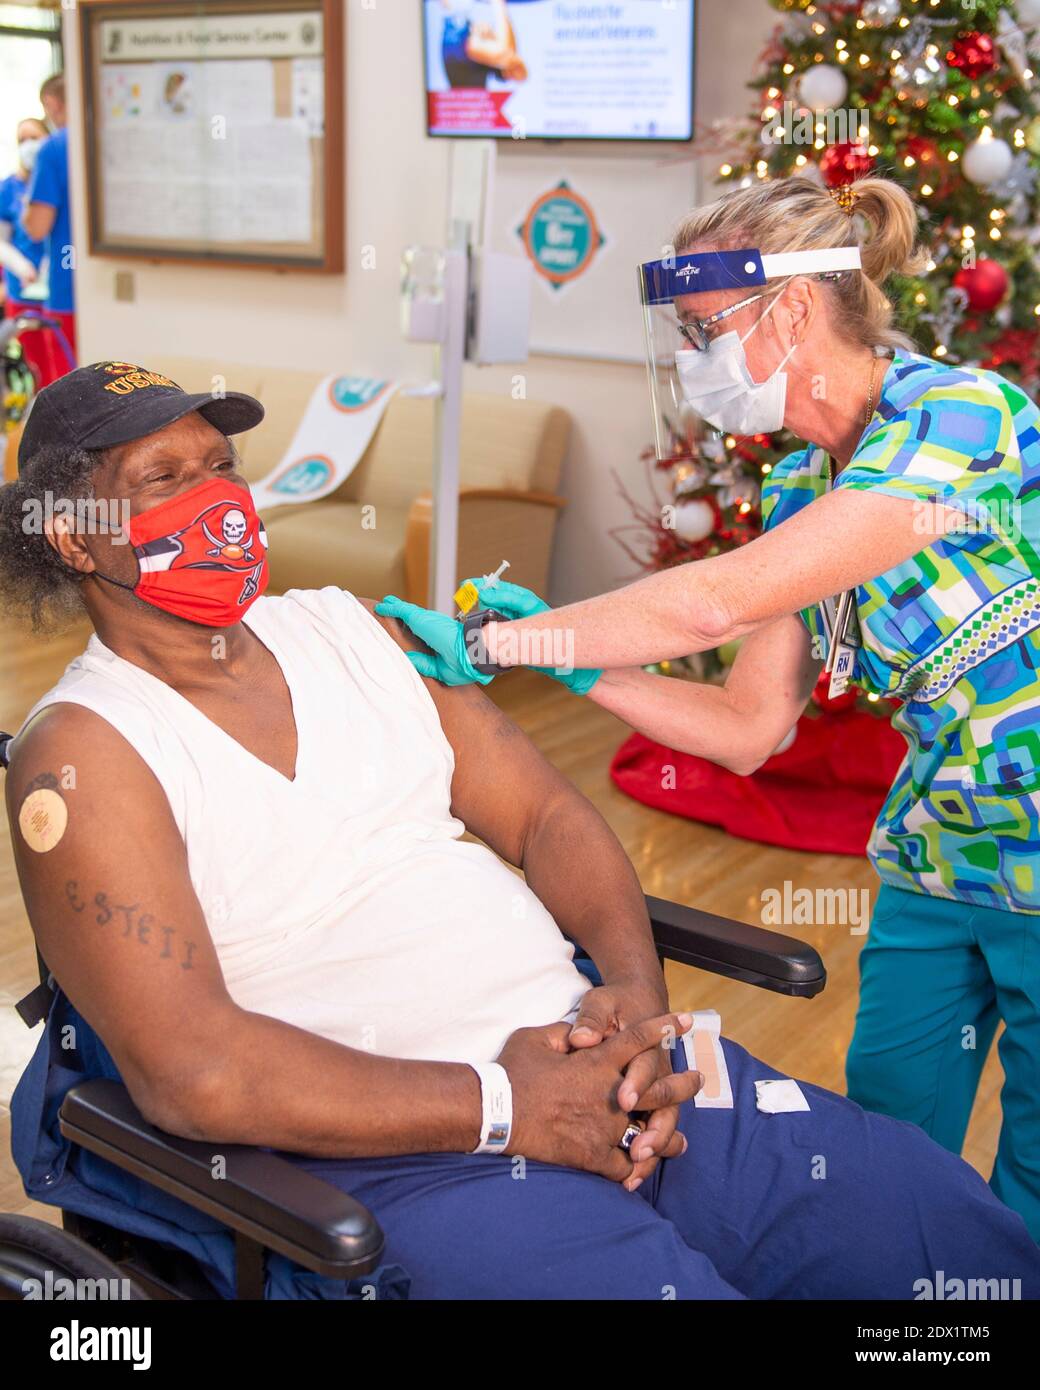 Bay Pines, United States. 22nd Dec, 2020. Marine Corps Veteran Danny James, Sr., resident of the Bay Pines VA Healthcare System Community Living Center, receives a COVID-19 vaccine December 22, 2020 in Bay Pines, Florida. Credit: Planetpix/Alamy Live News Stock Photo